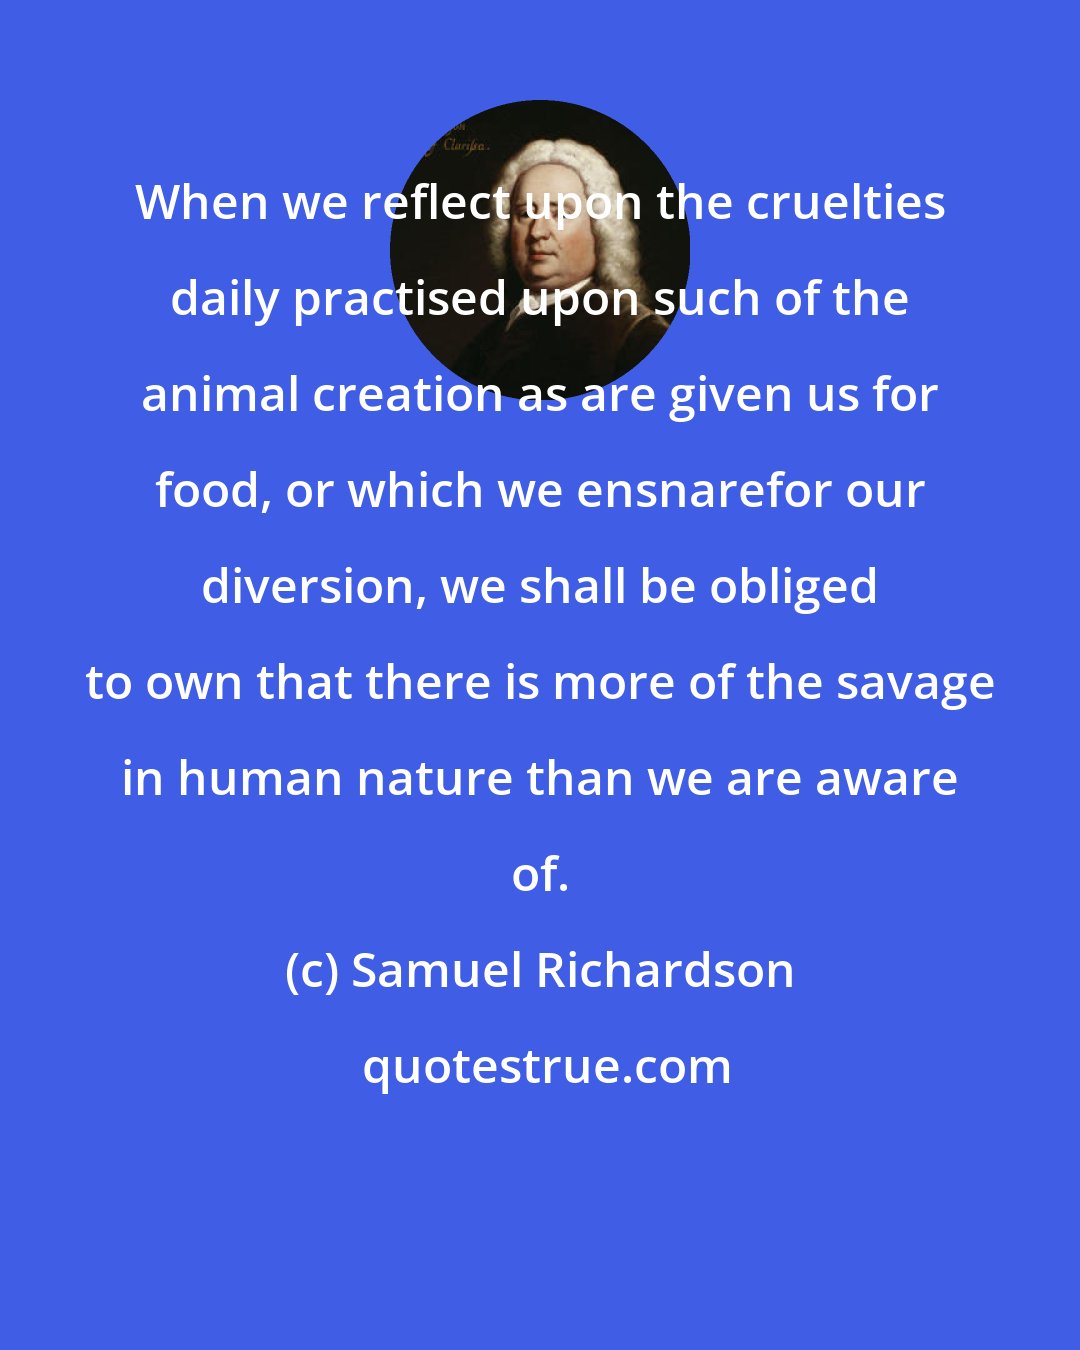 Samuel Richardson: When we reflect upon the cruelties daily practised upon such of the animal creation as are given us for food, or which we ensnarefor our diversion, we shall be obliged to own that there is more of the savage in human nature than we are aware of.